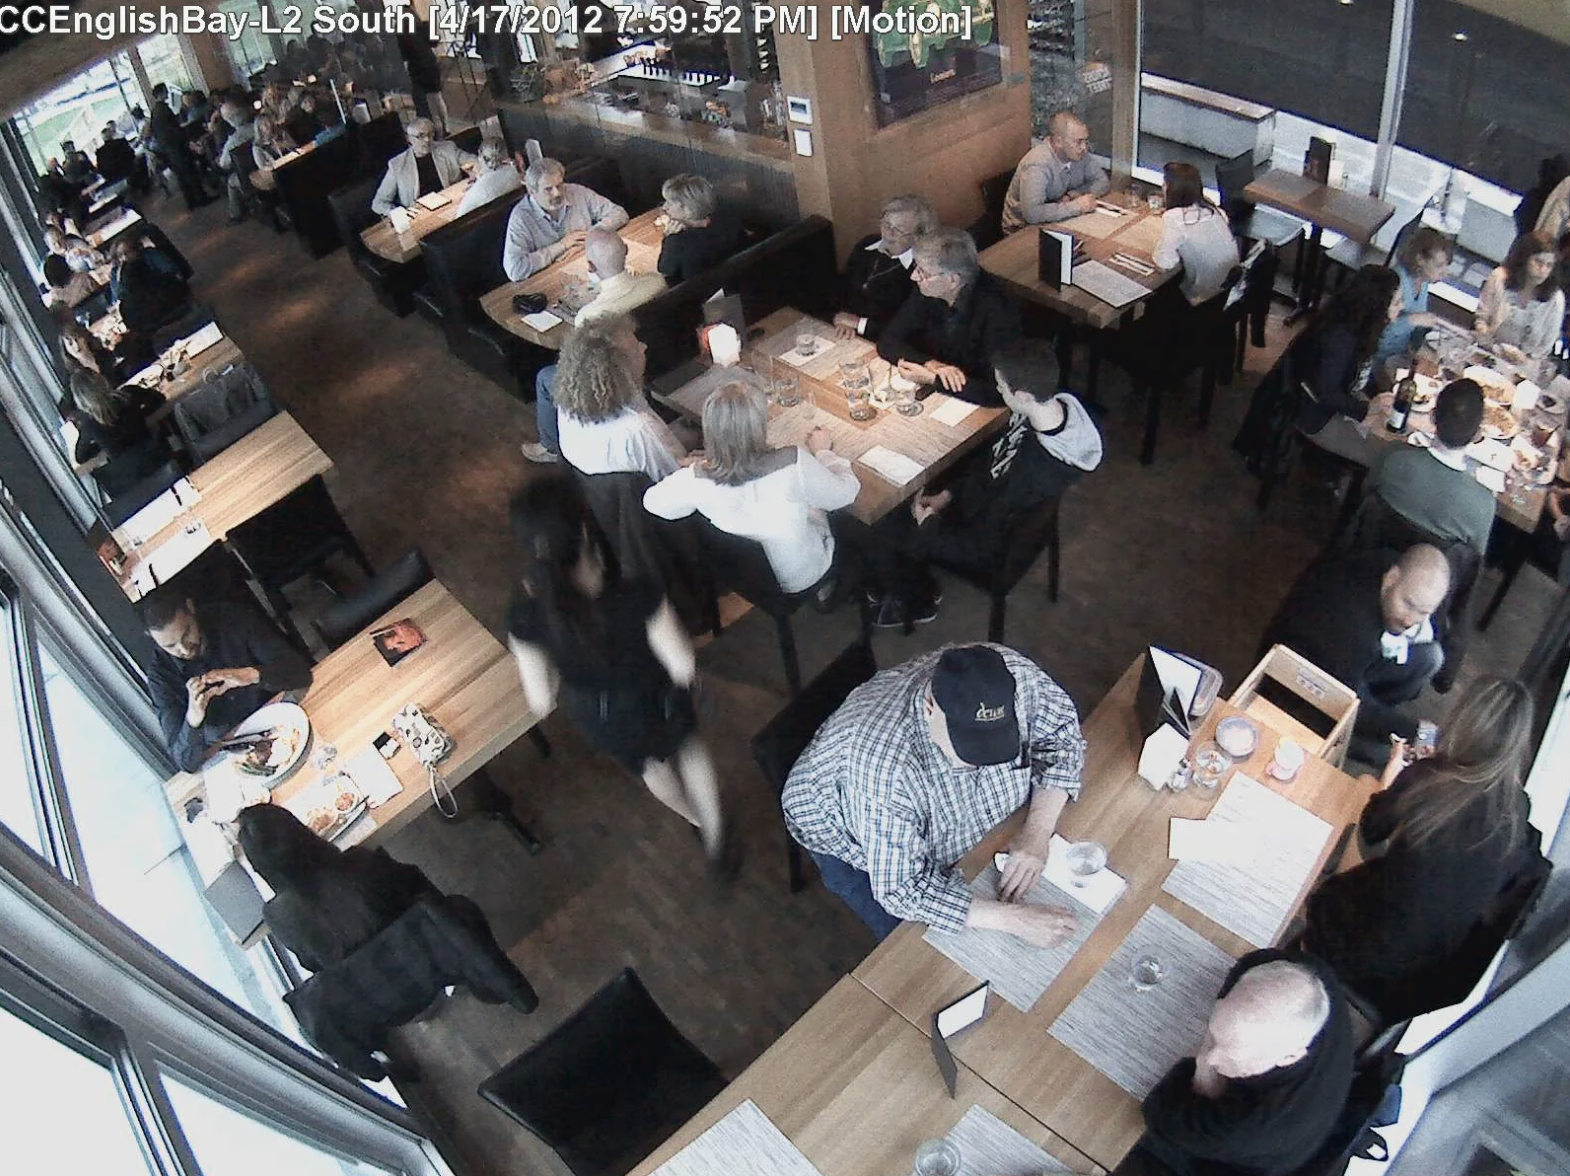 The view of the restaurant from the video surveillance camera | Source: Shutterstock